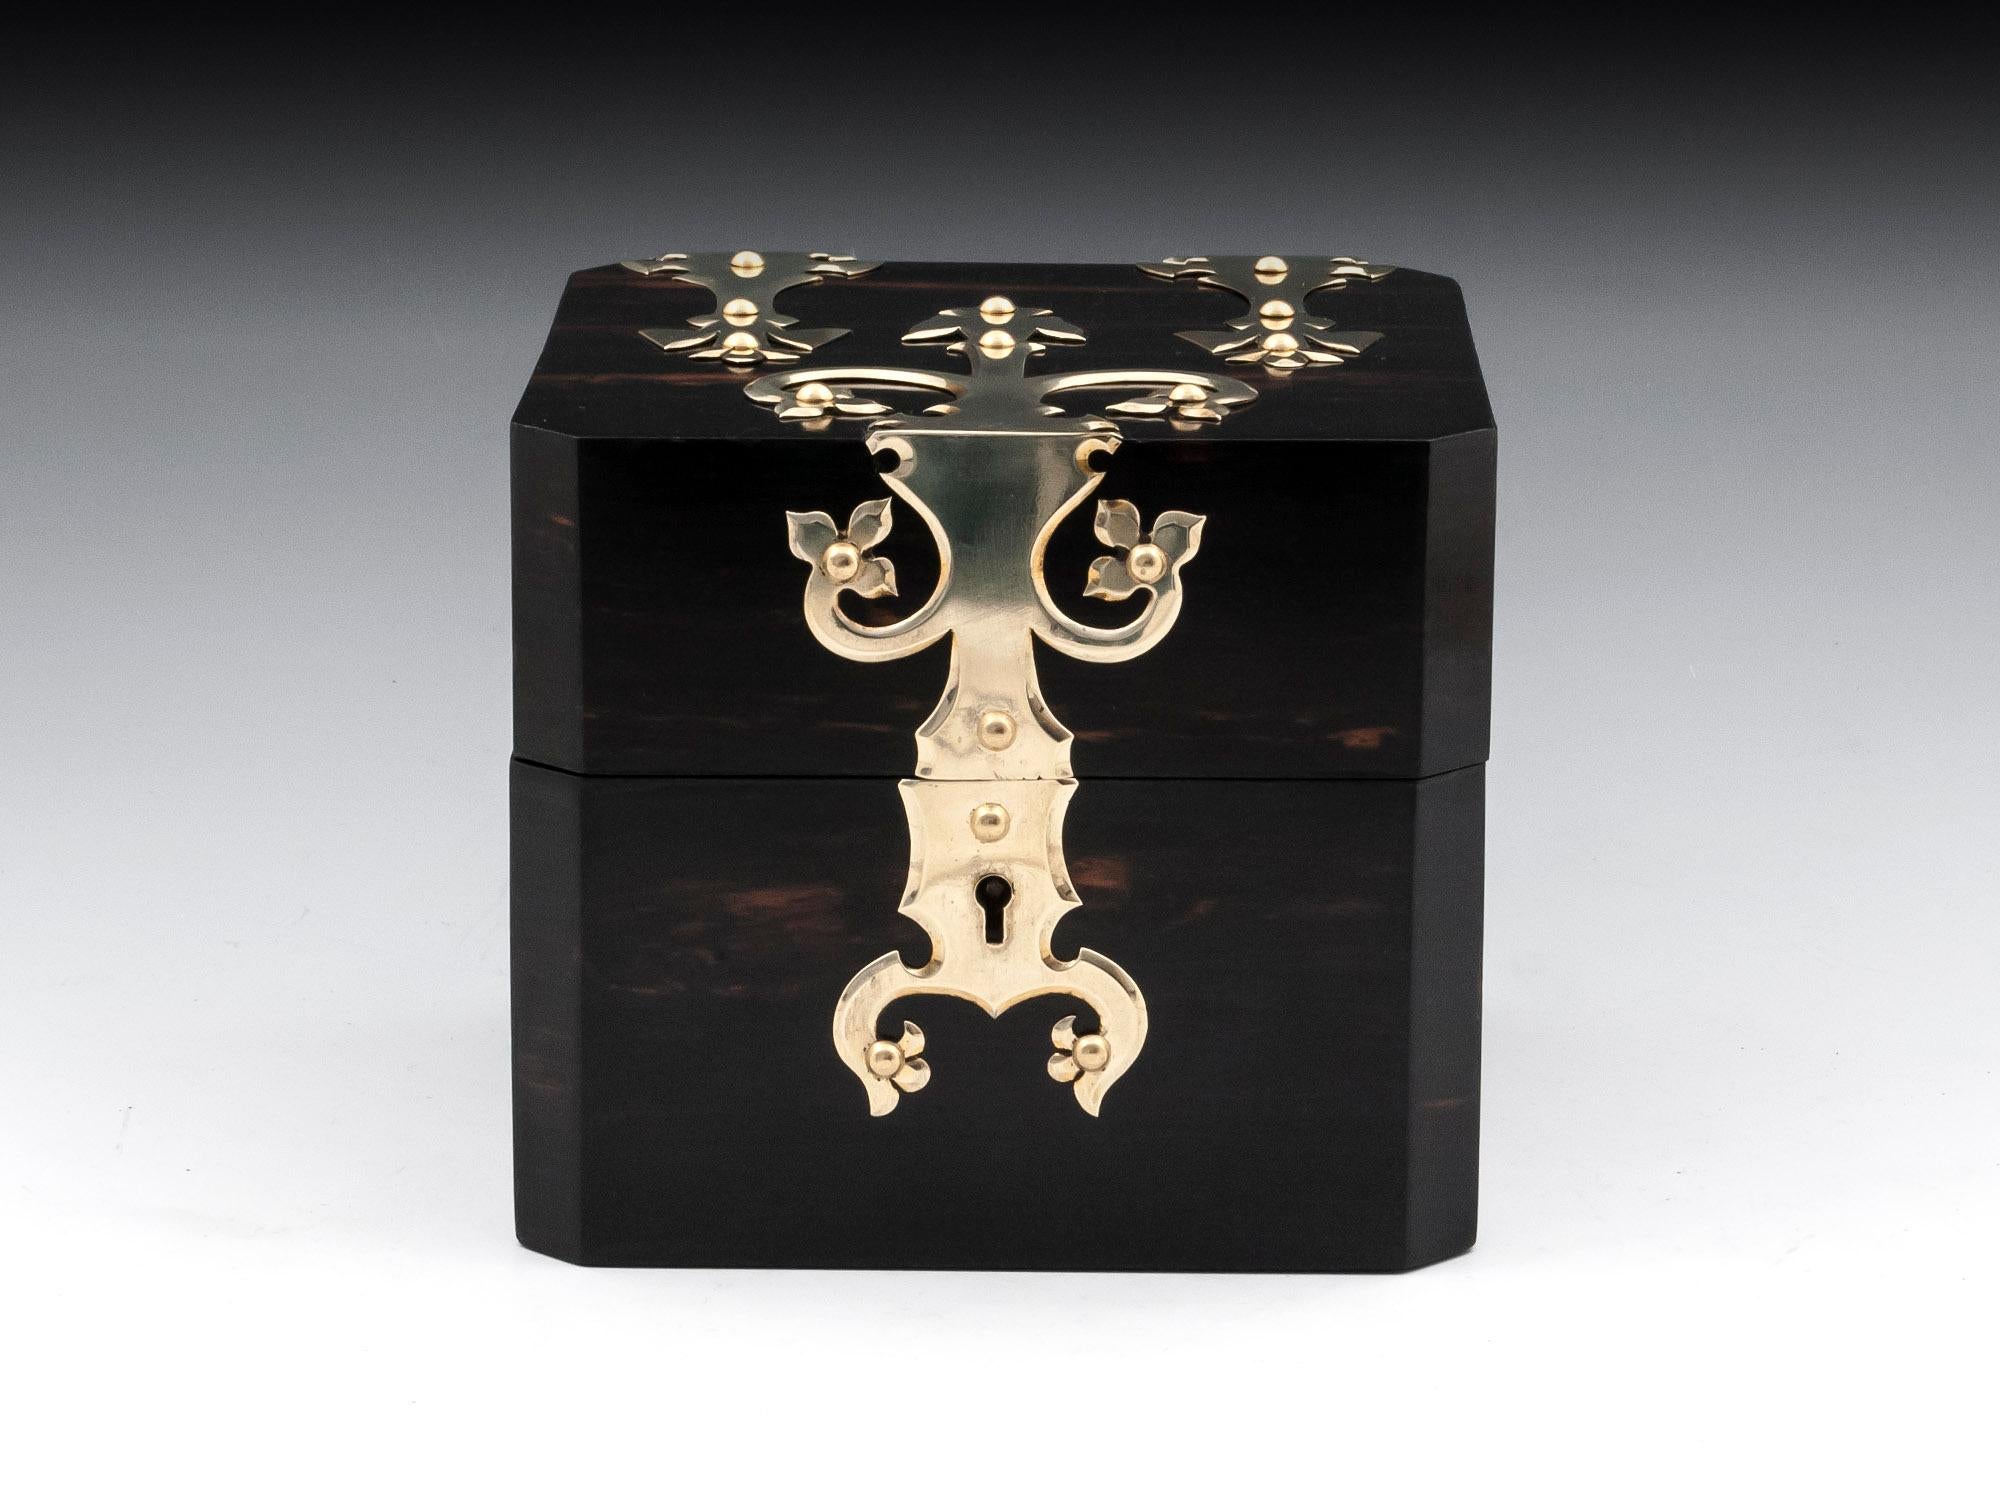 Antique jewelry box with canted corners veneered in exotic coromandel with ornate brass mounts. 

The interior of our bespoke fitted antique watch / jewelry box is lined in a deep green velvet and silk paper. It contains a removable jewelry tray